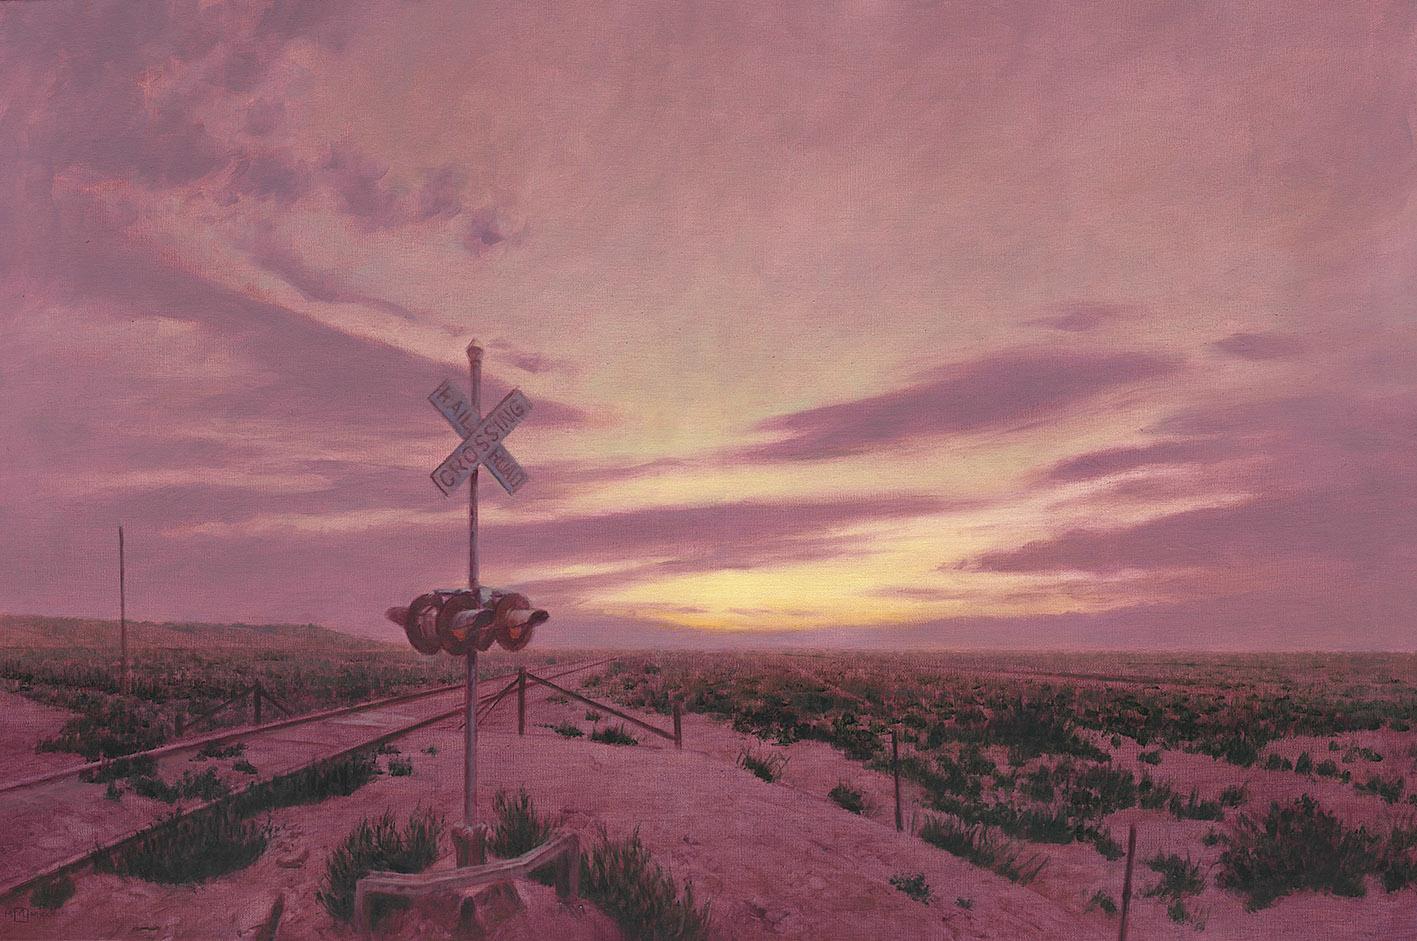 Mark Harrison Landscape Painting - "Crossing" Oil Painting 